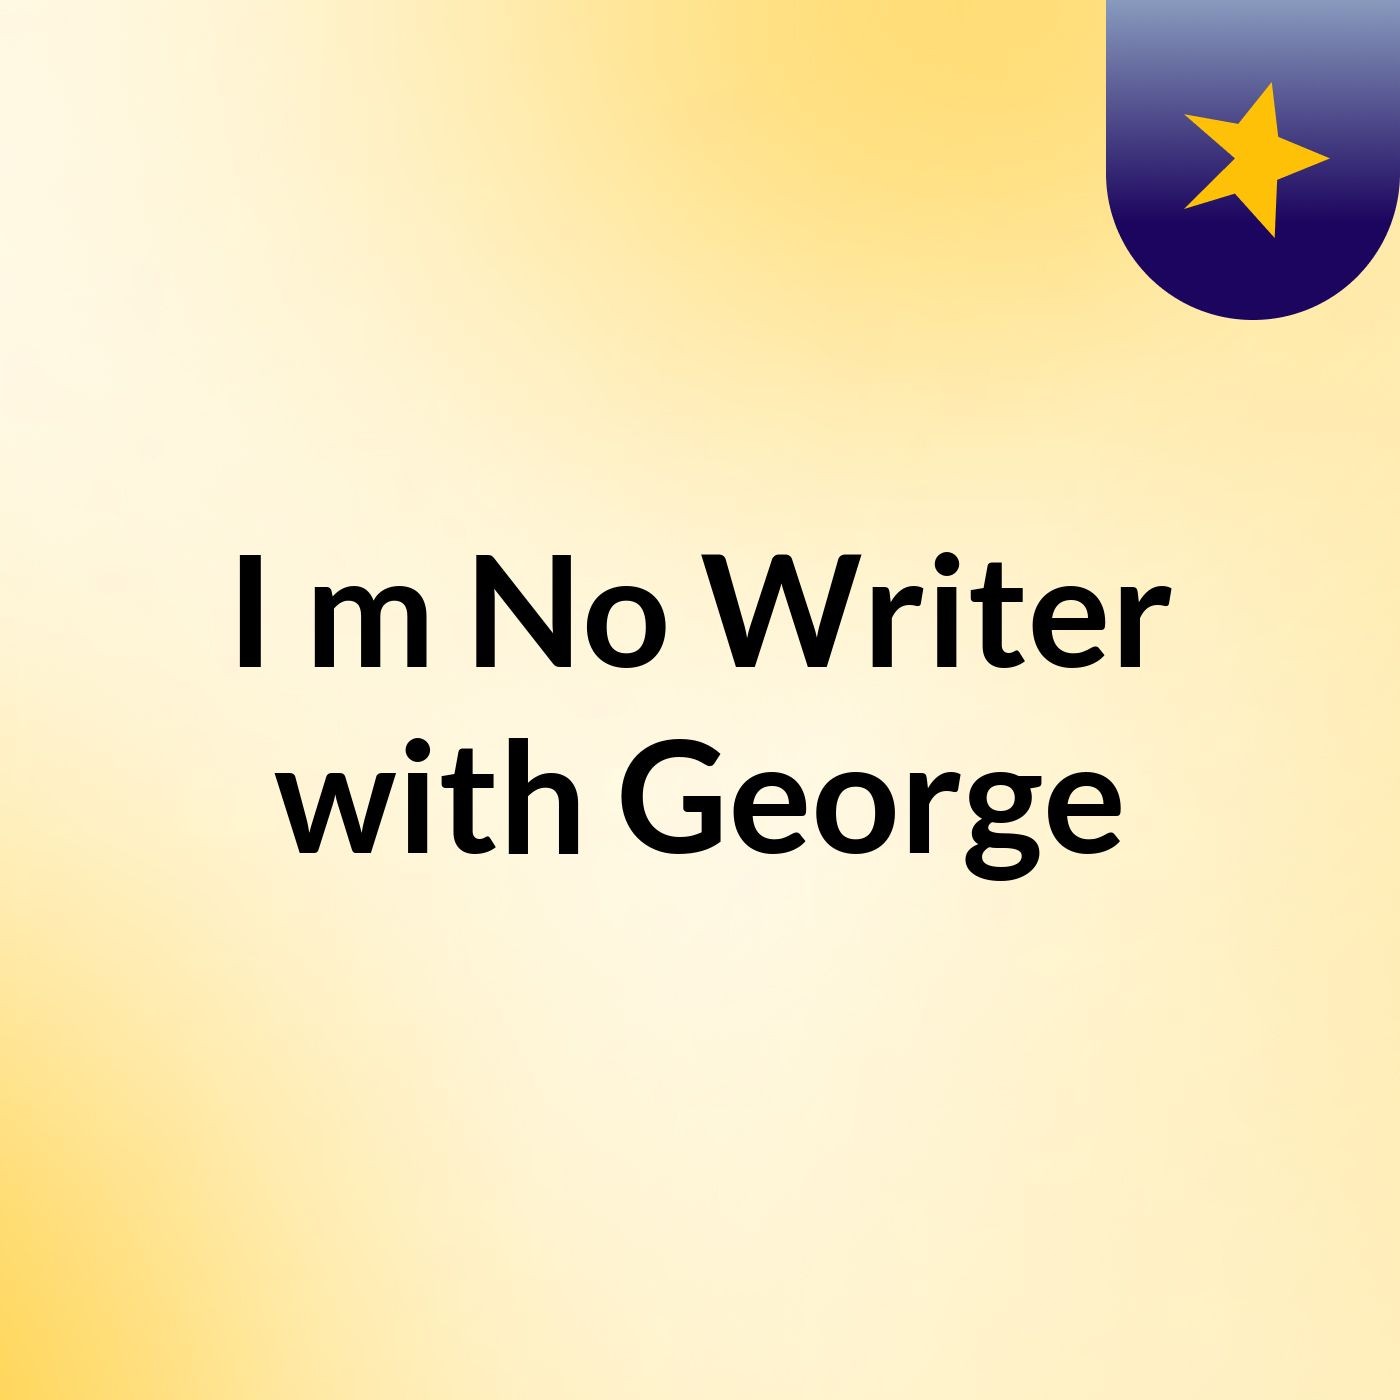 I’m No Writer with George